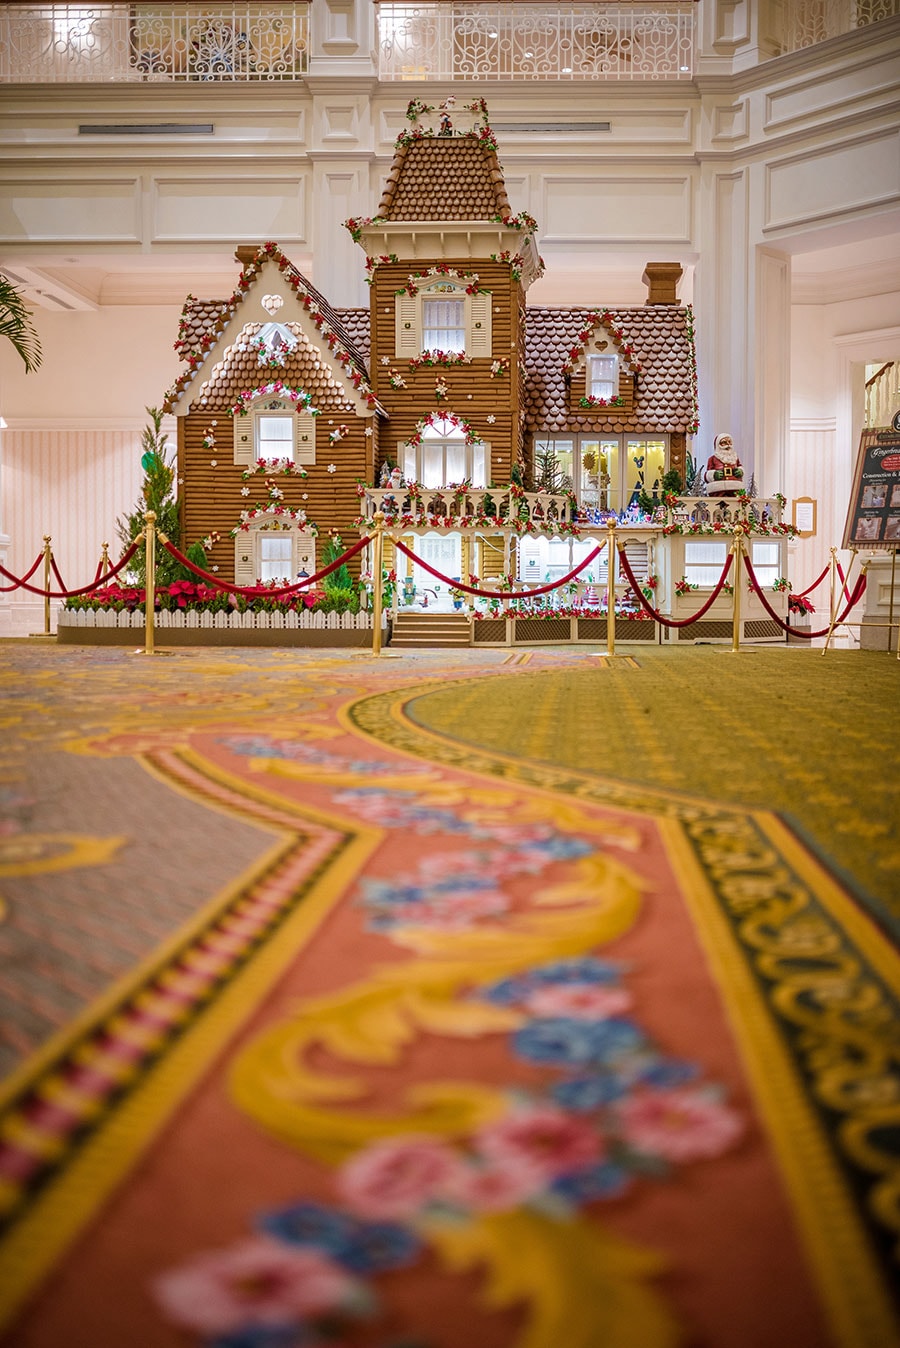 Five Photos That Will Make You Want To Visit A Walt Disney World Resort Hotel During The Holidays